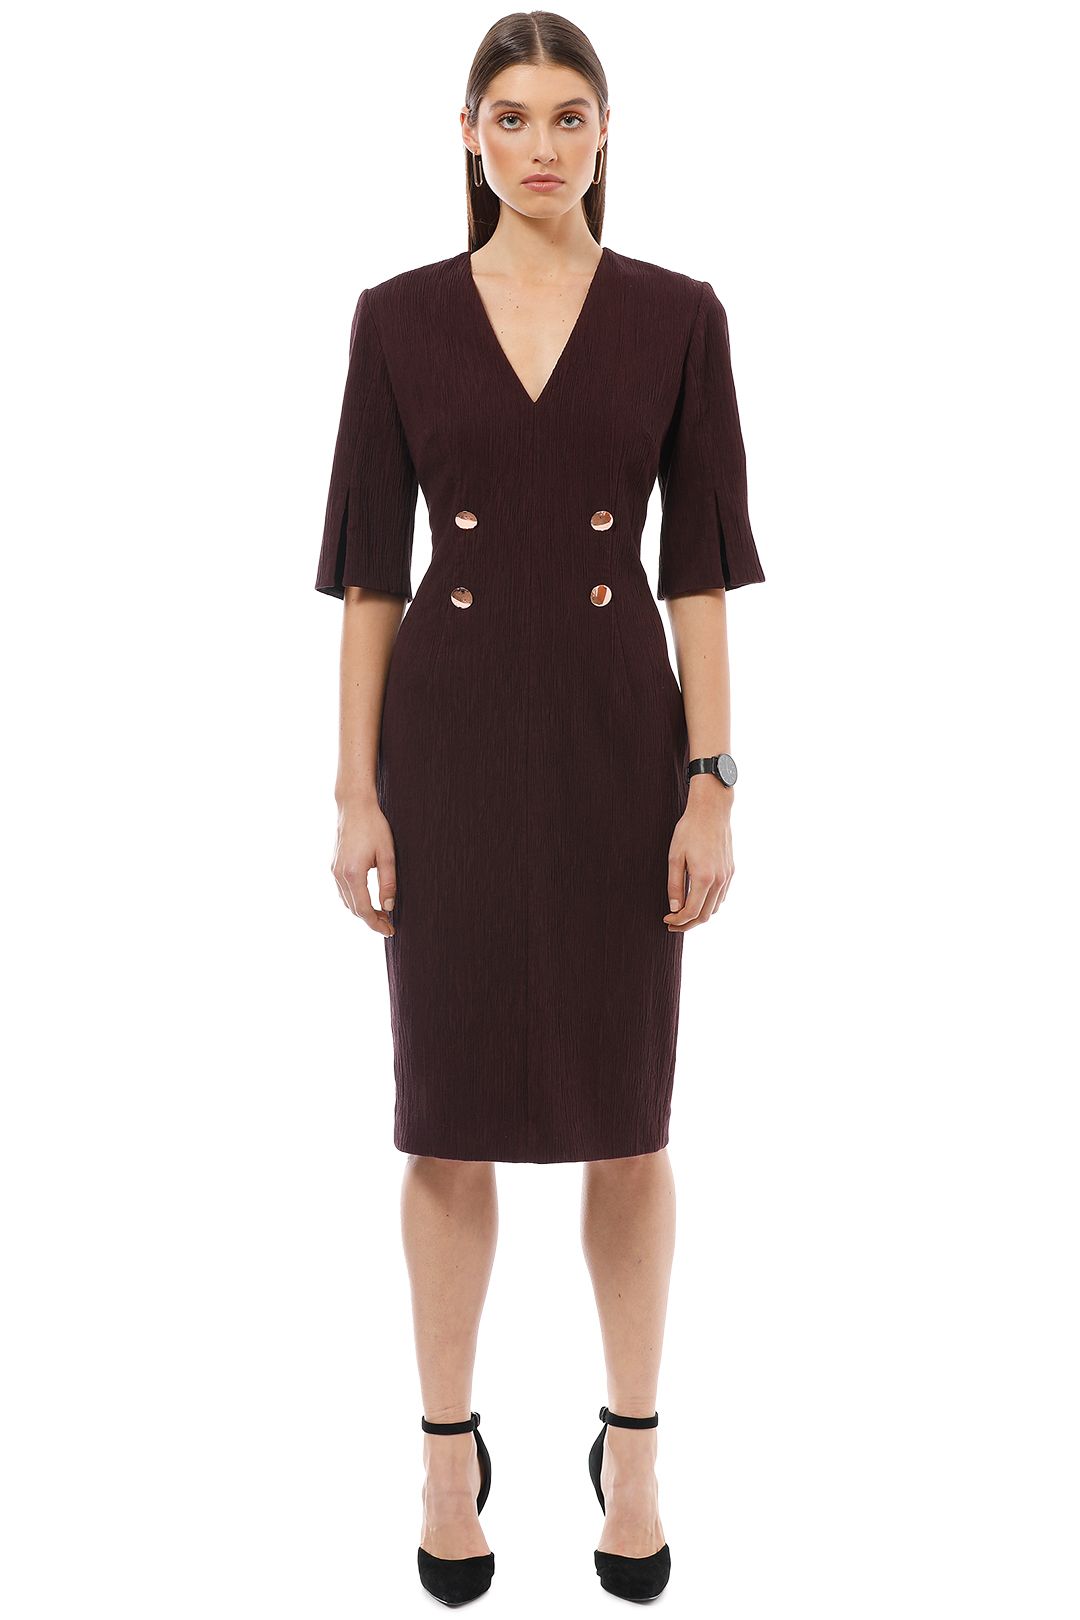 Ginger and Smart - Moduate Dress with Sleeve - Burgundy - Front